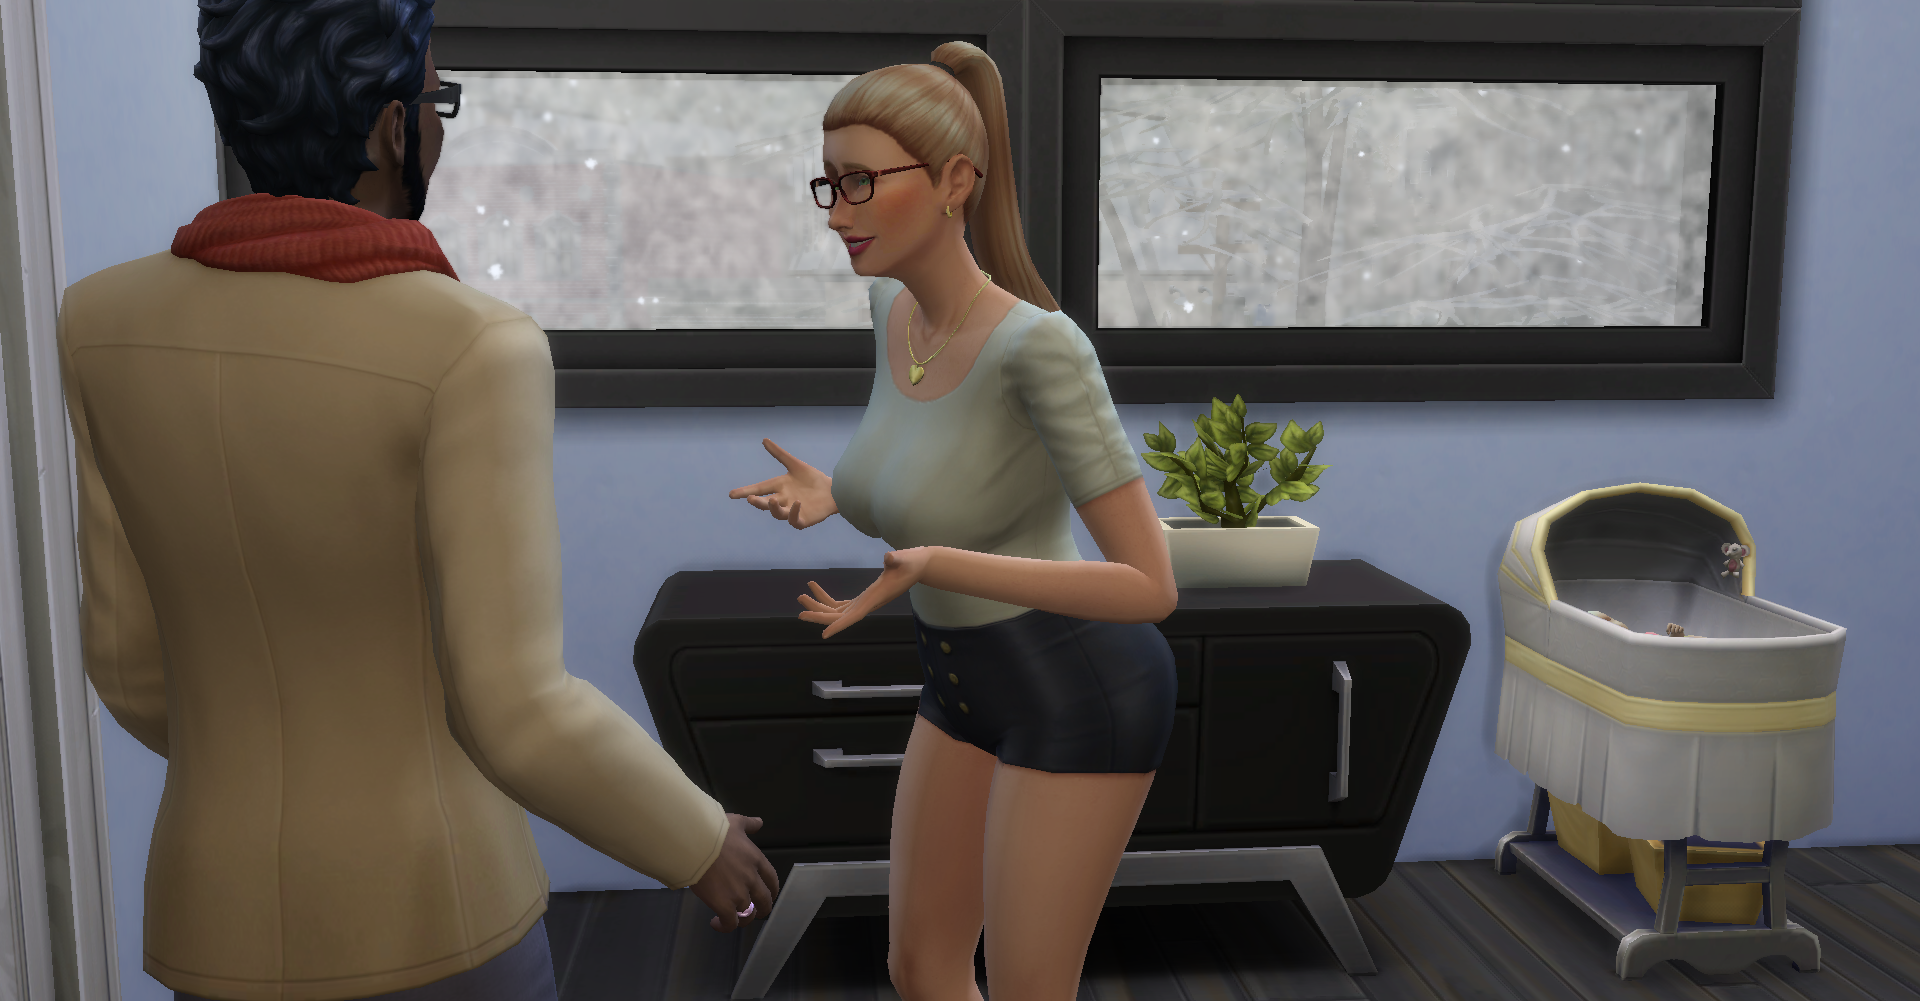 Hot Complications Sims Story Page 8 The Sims 4 General Discussion 1389